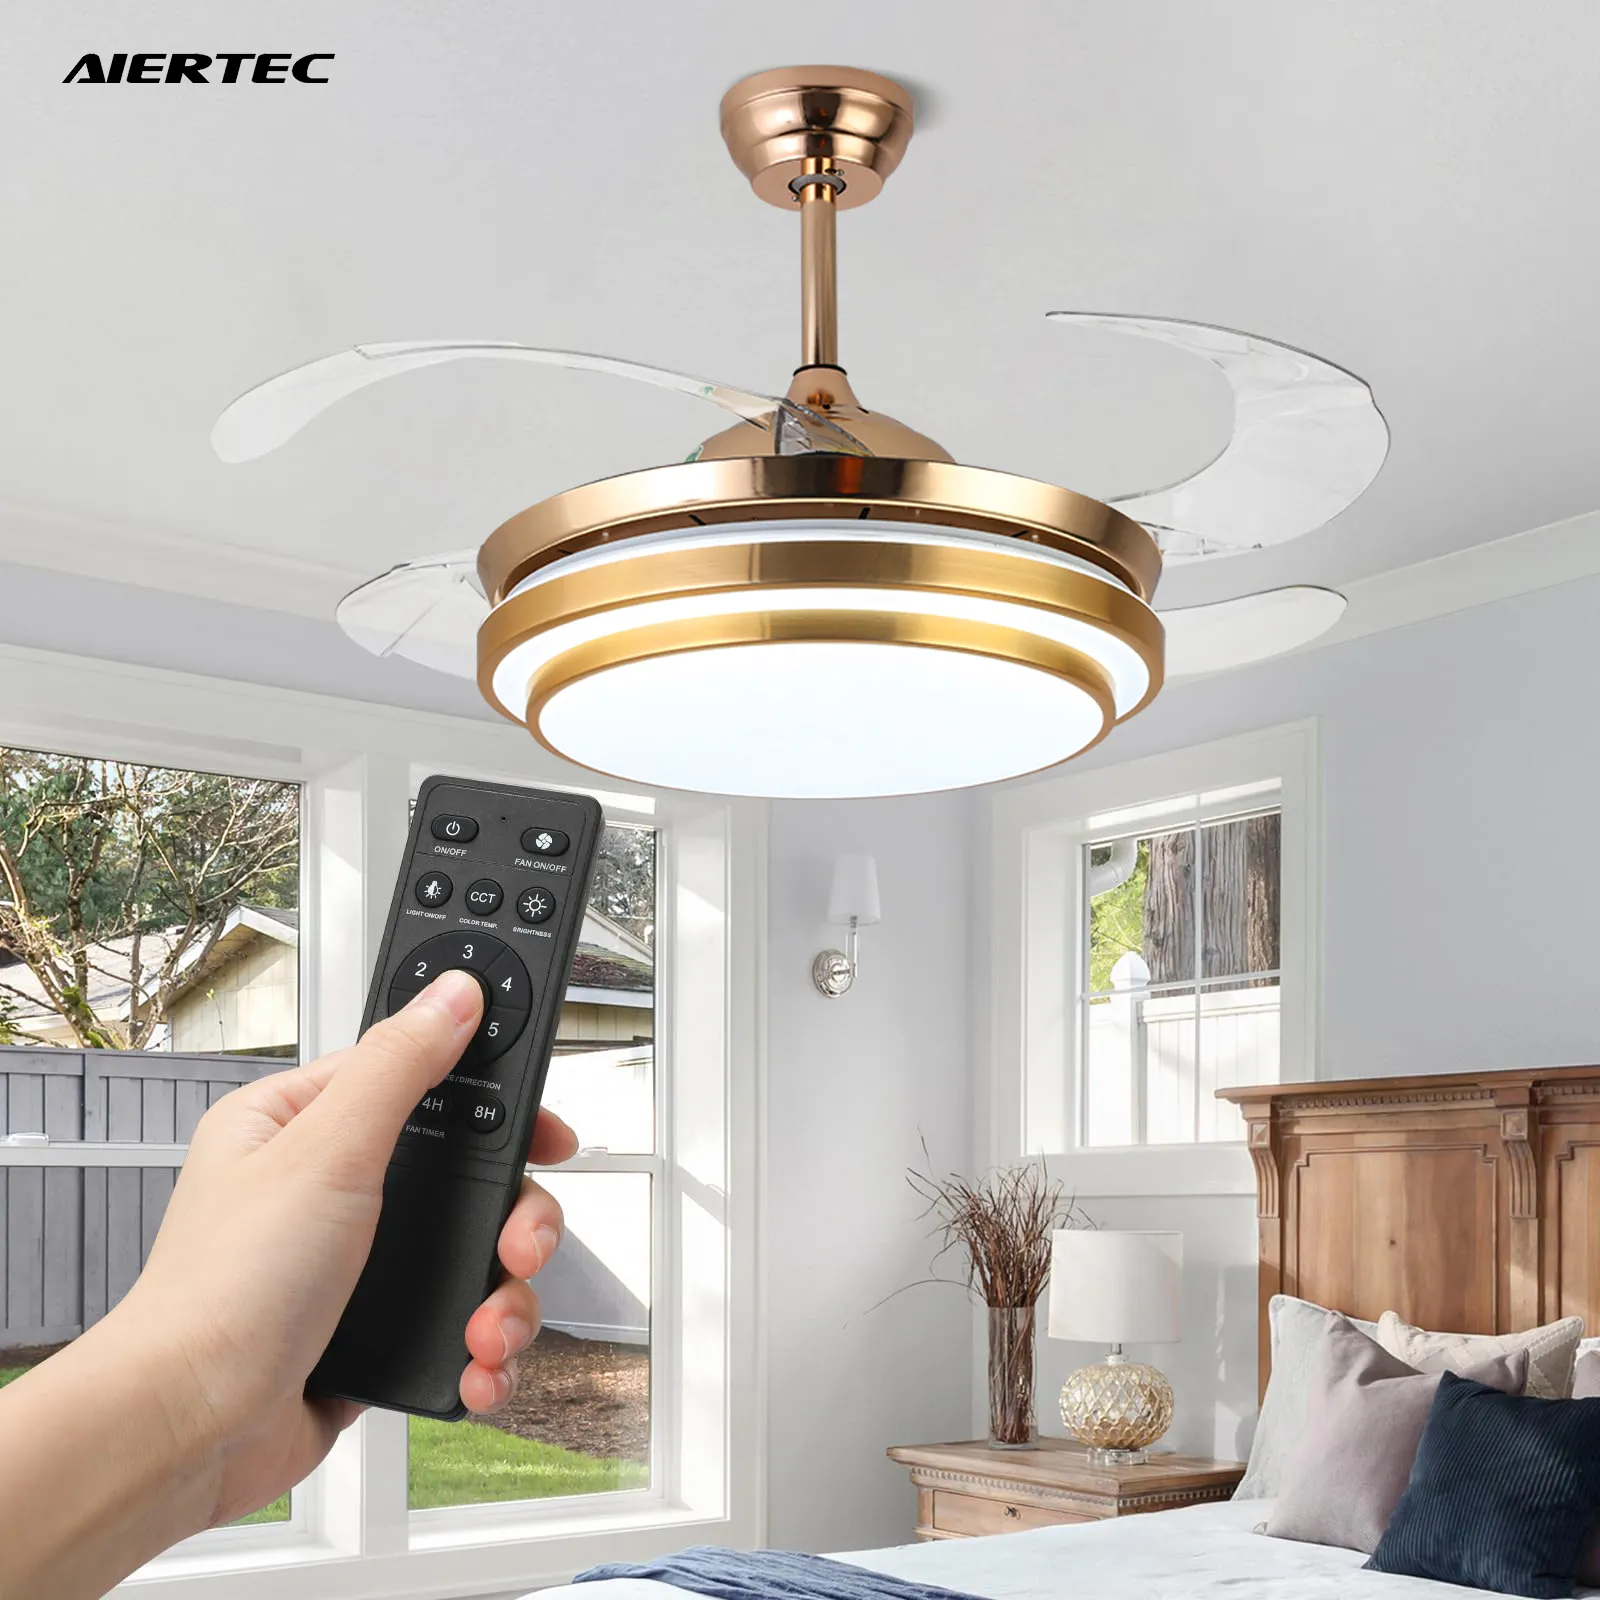 AIERTEC 42'' Chandelier 4 ABS Blades All Copper Moto Retractable Invisible Led Ceiling Fan With Light And Remote